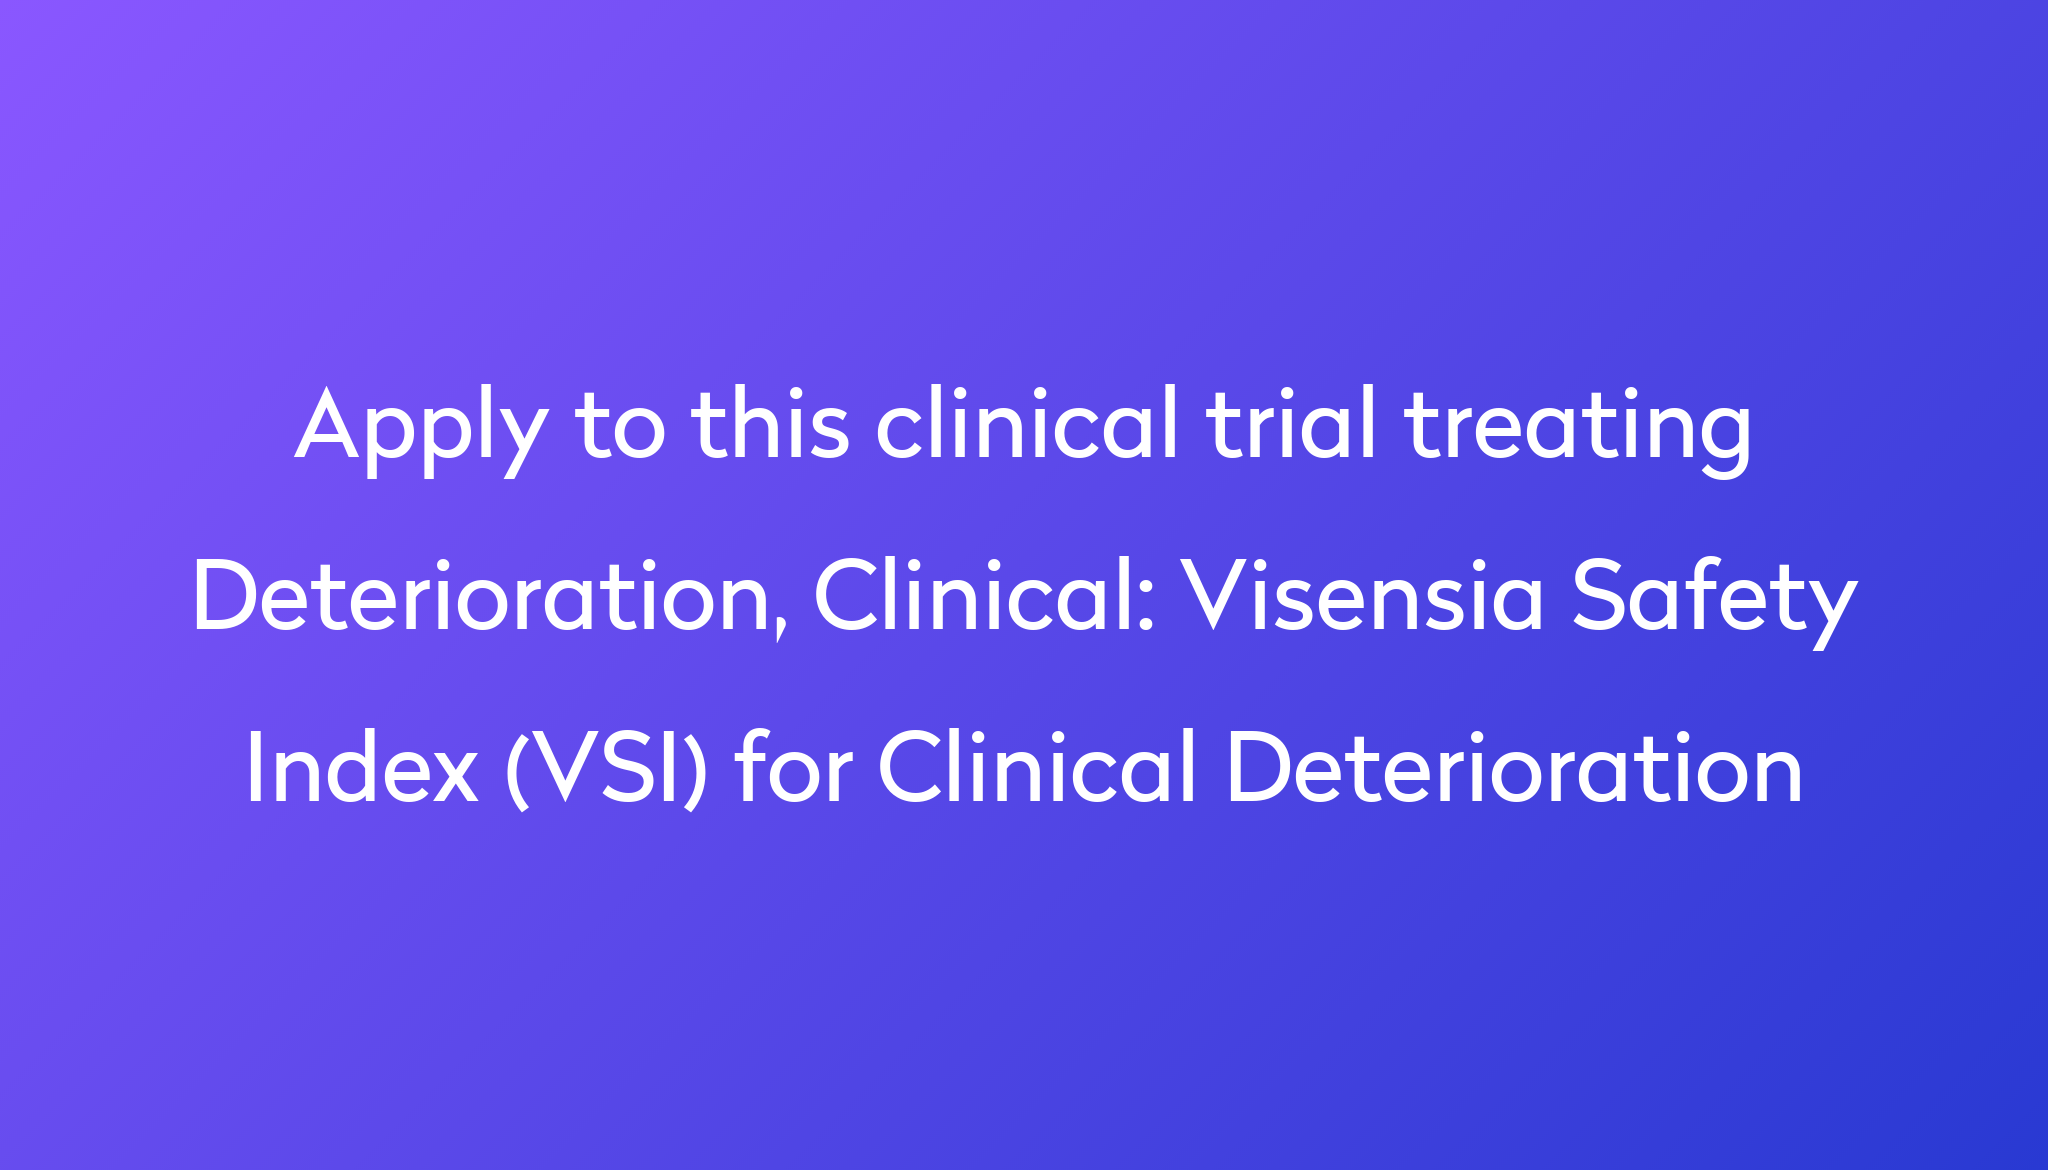 Visensia Safety Index (VSI) for Clinical Deterioration Clinical Trial